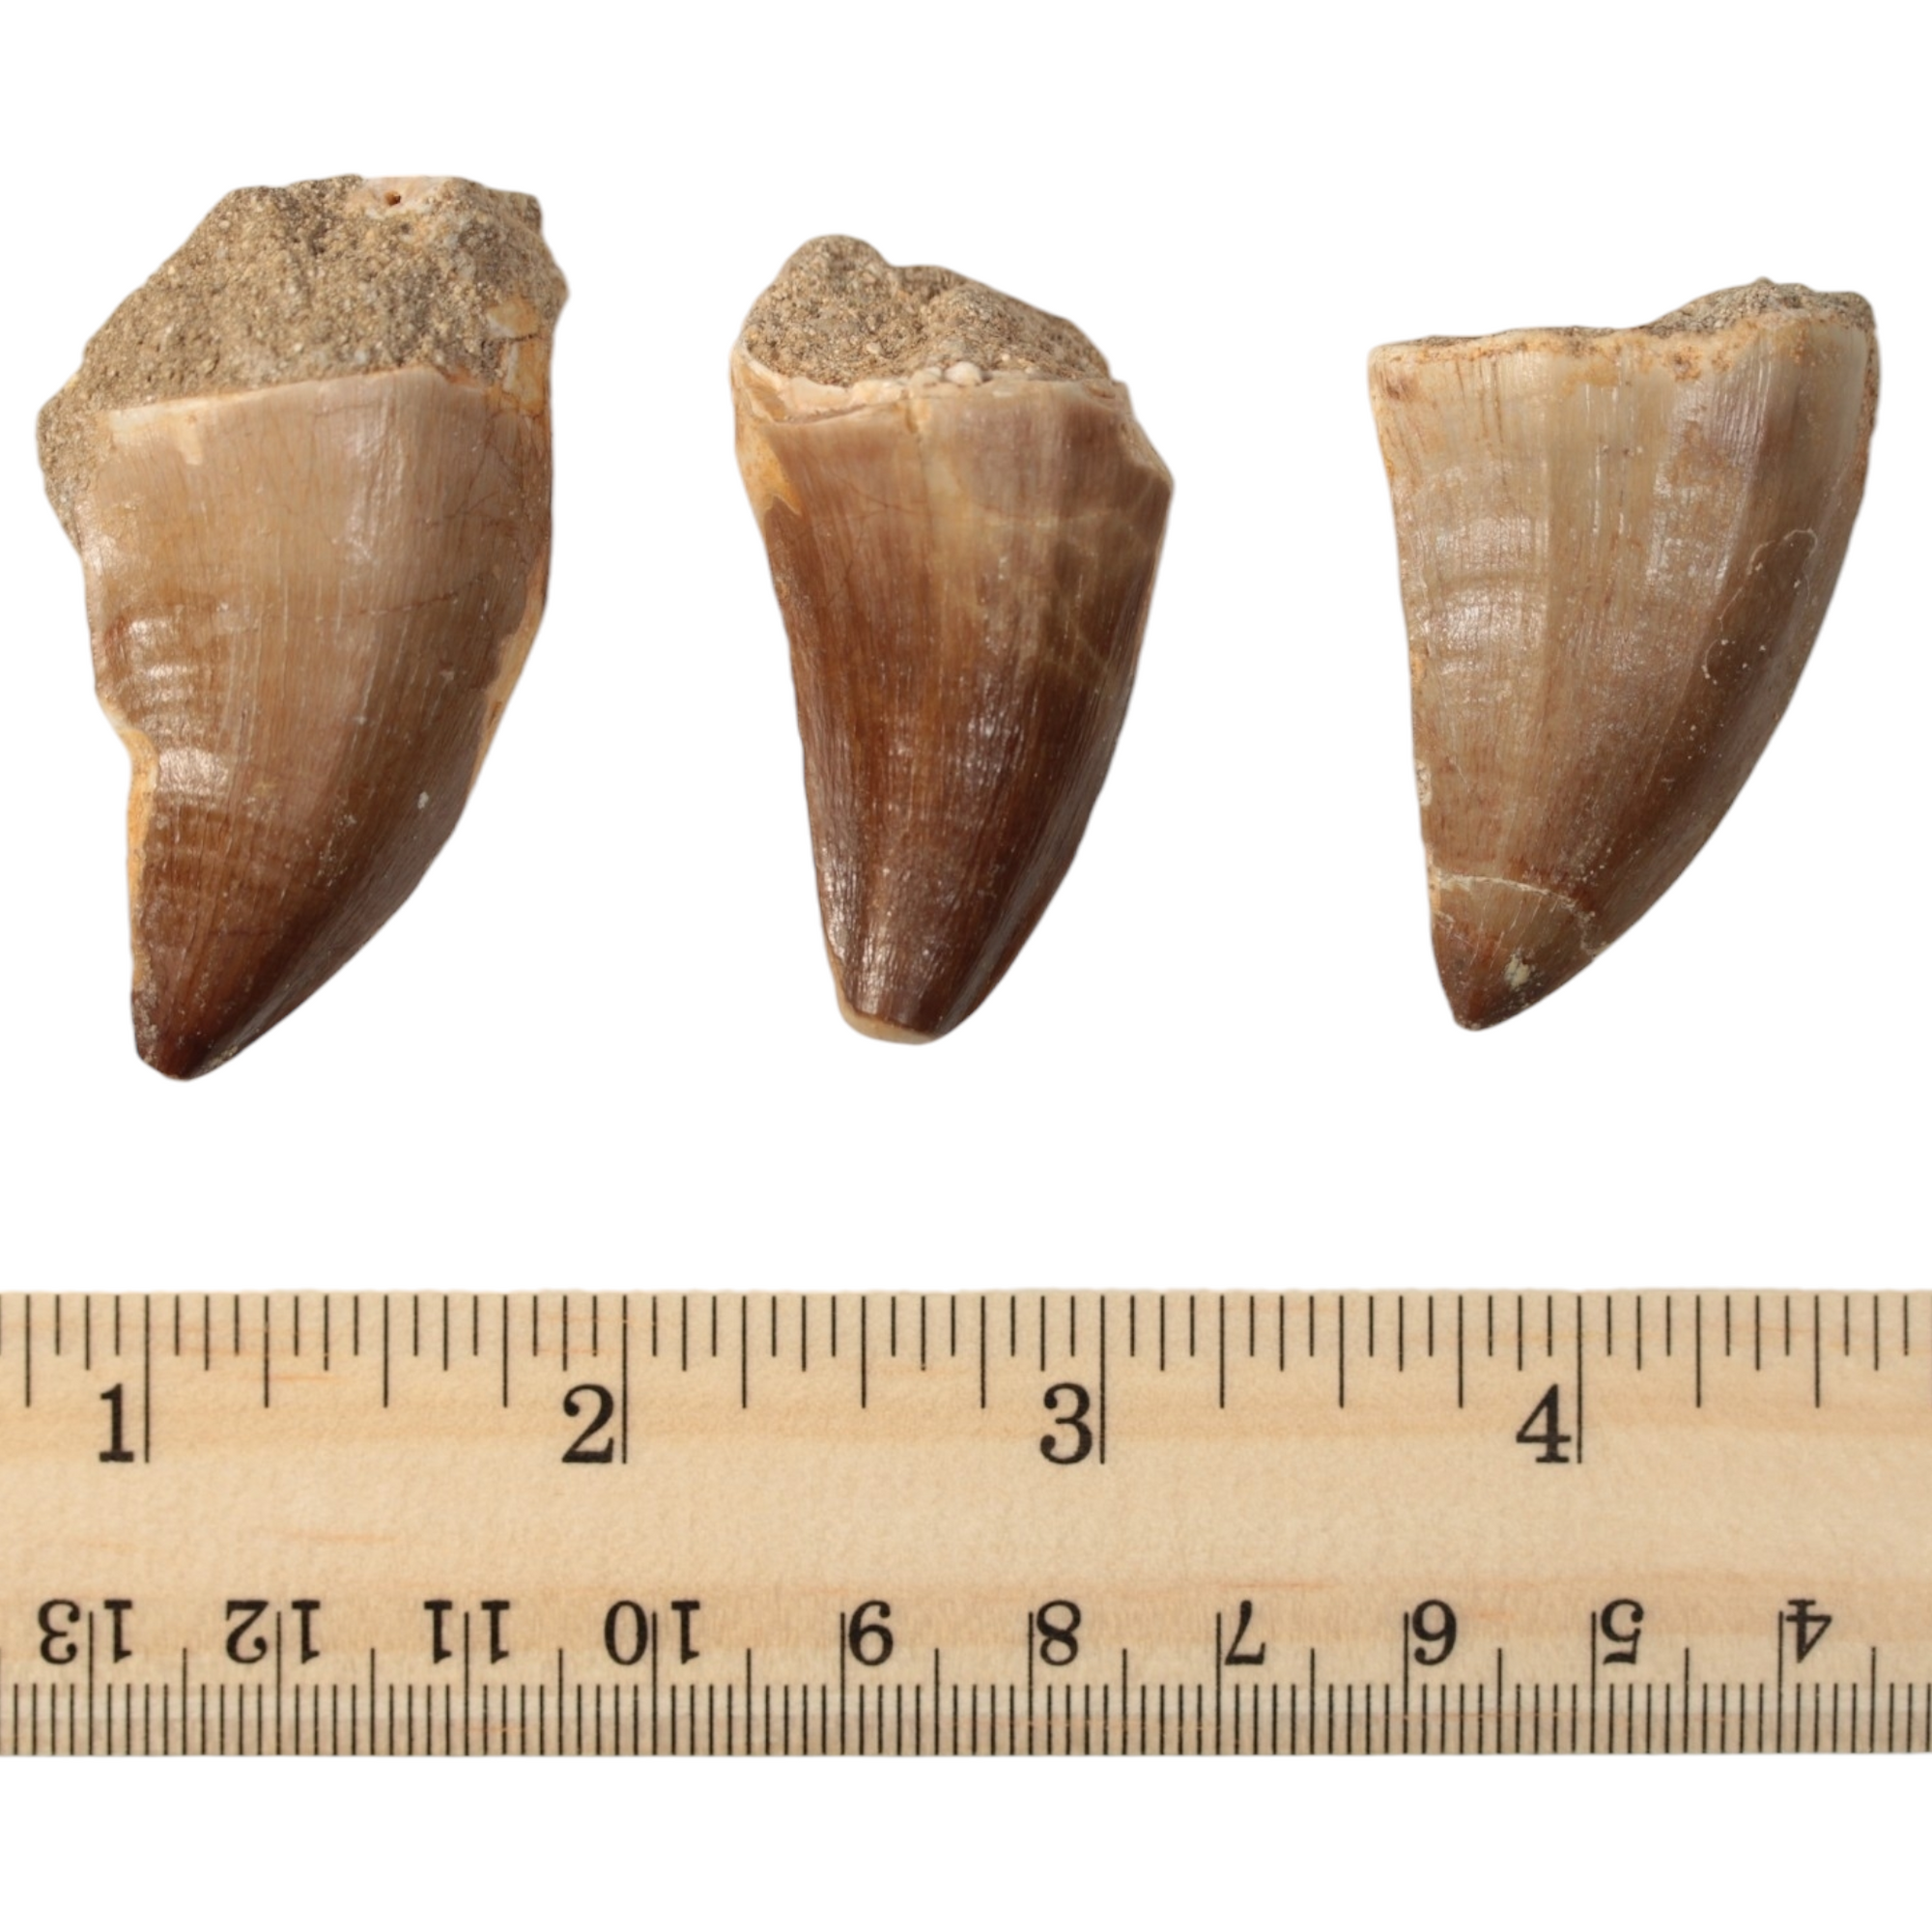 Large Mosasaur Tooth - Cretaceous Period - 101 to 66 MYA - Morocco